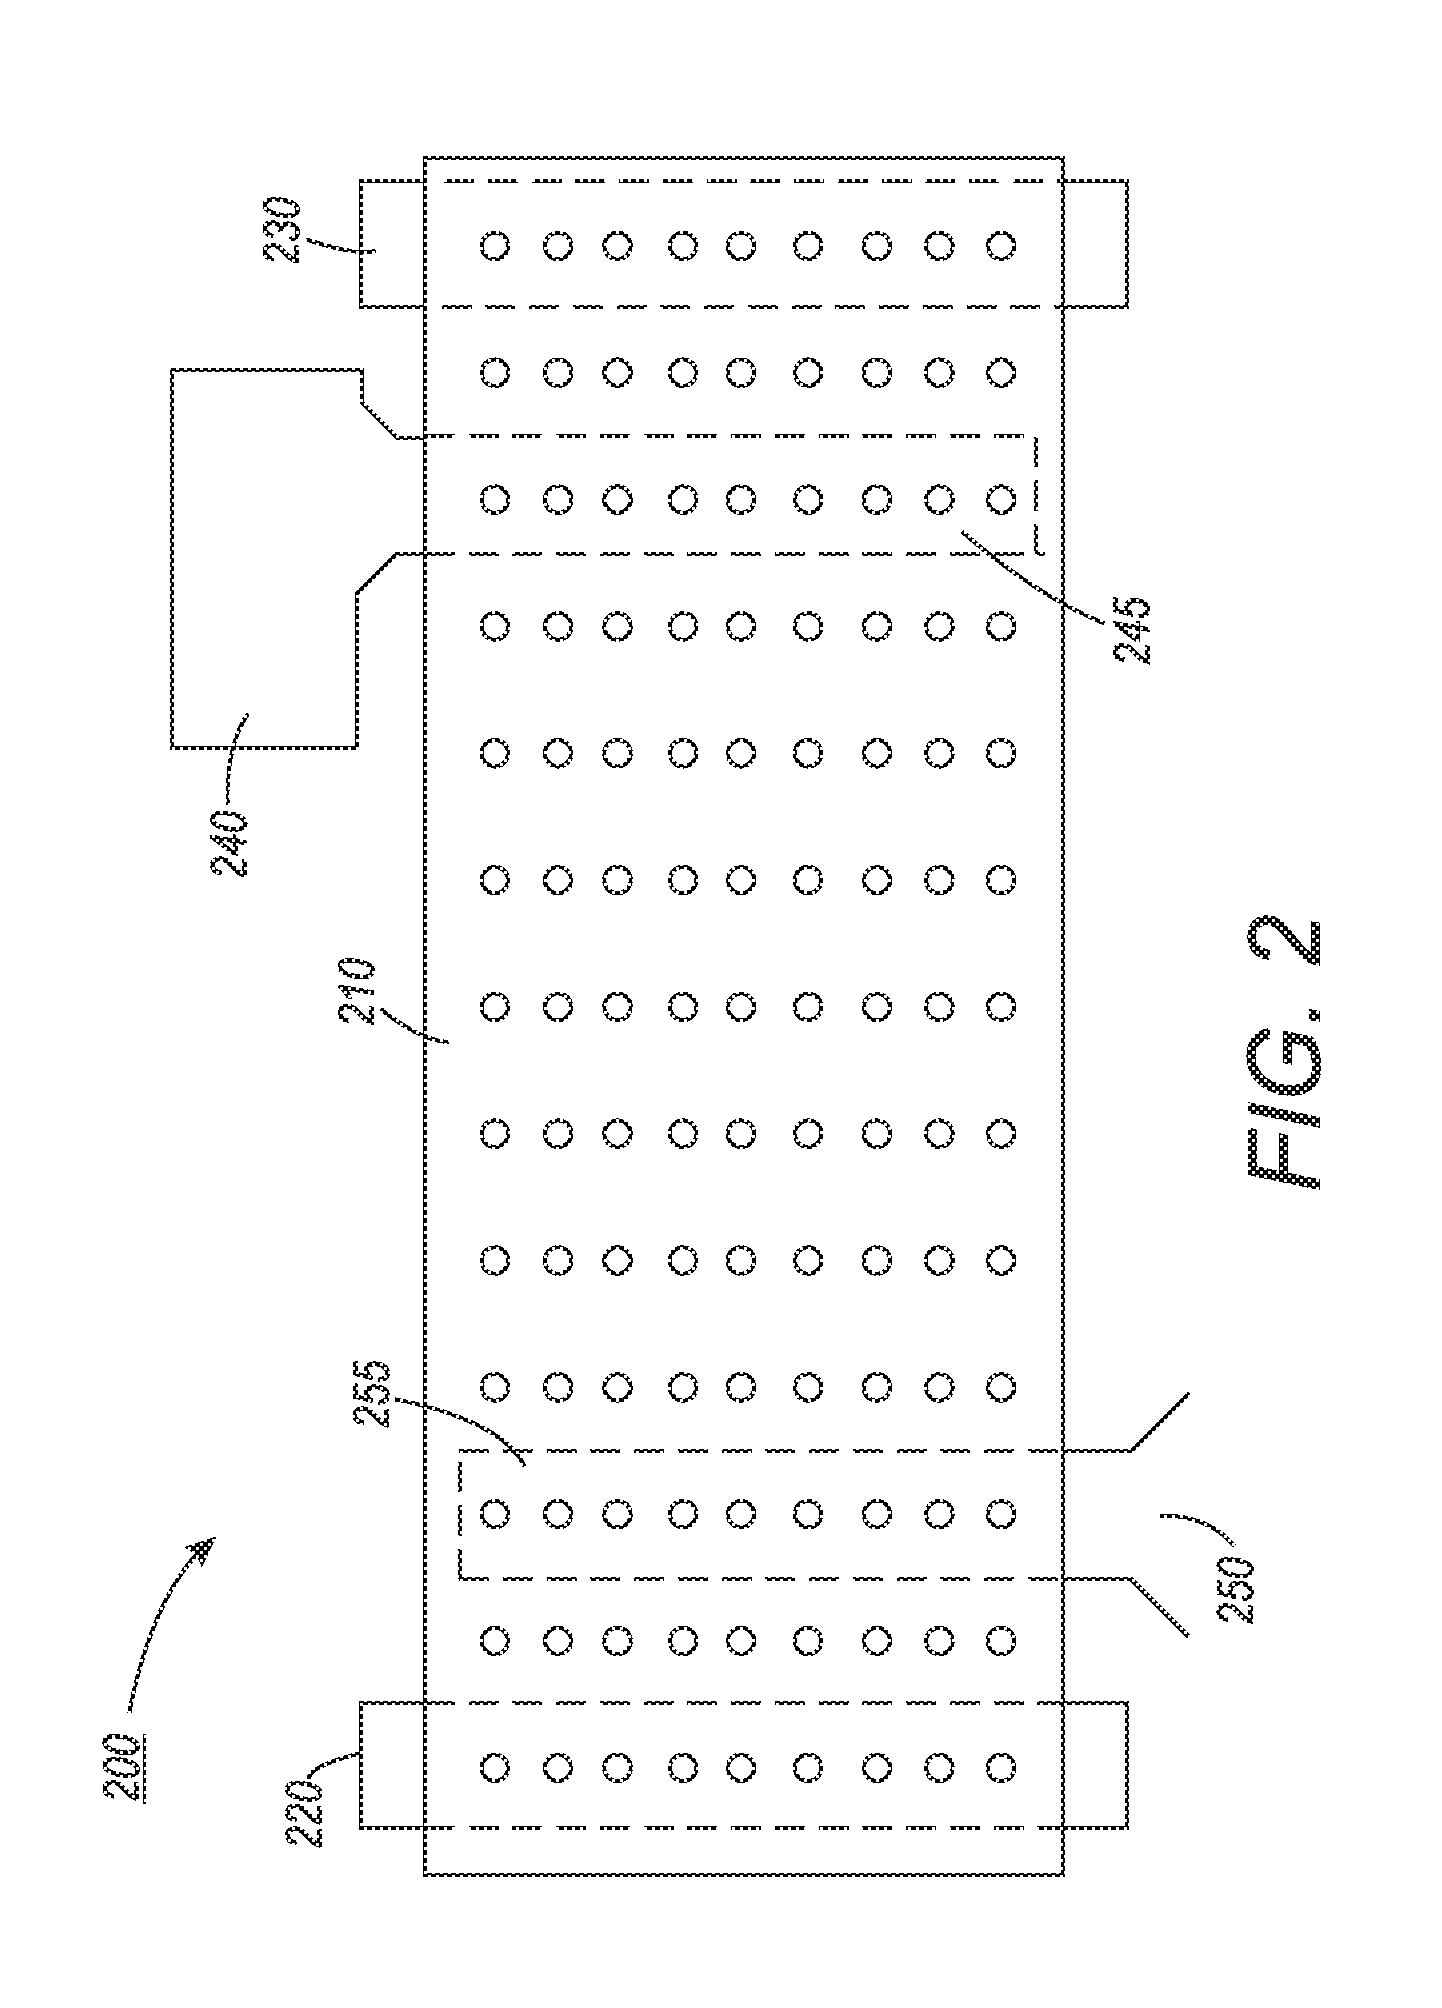 Systems and methods for implementing advanced vacuum belt transport systems